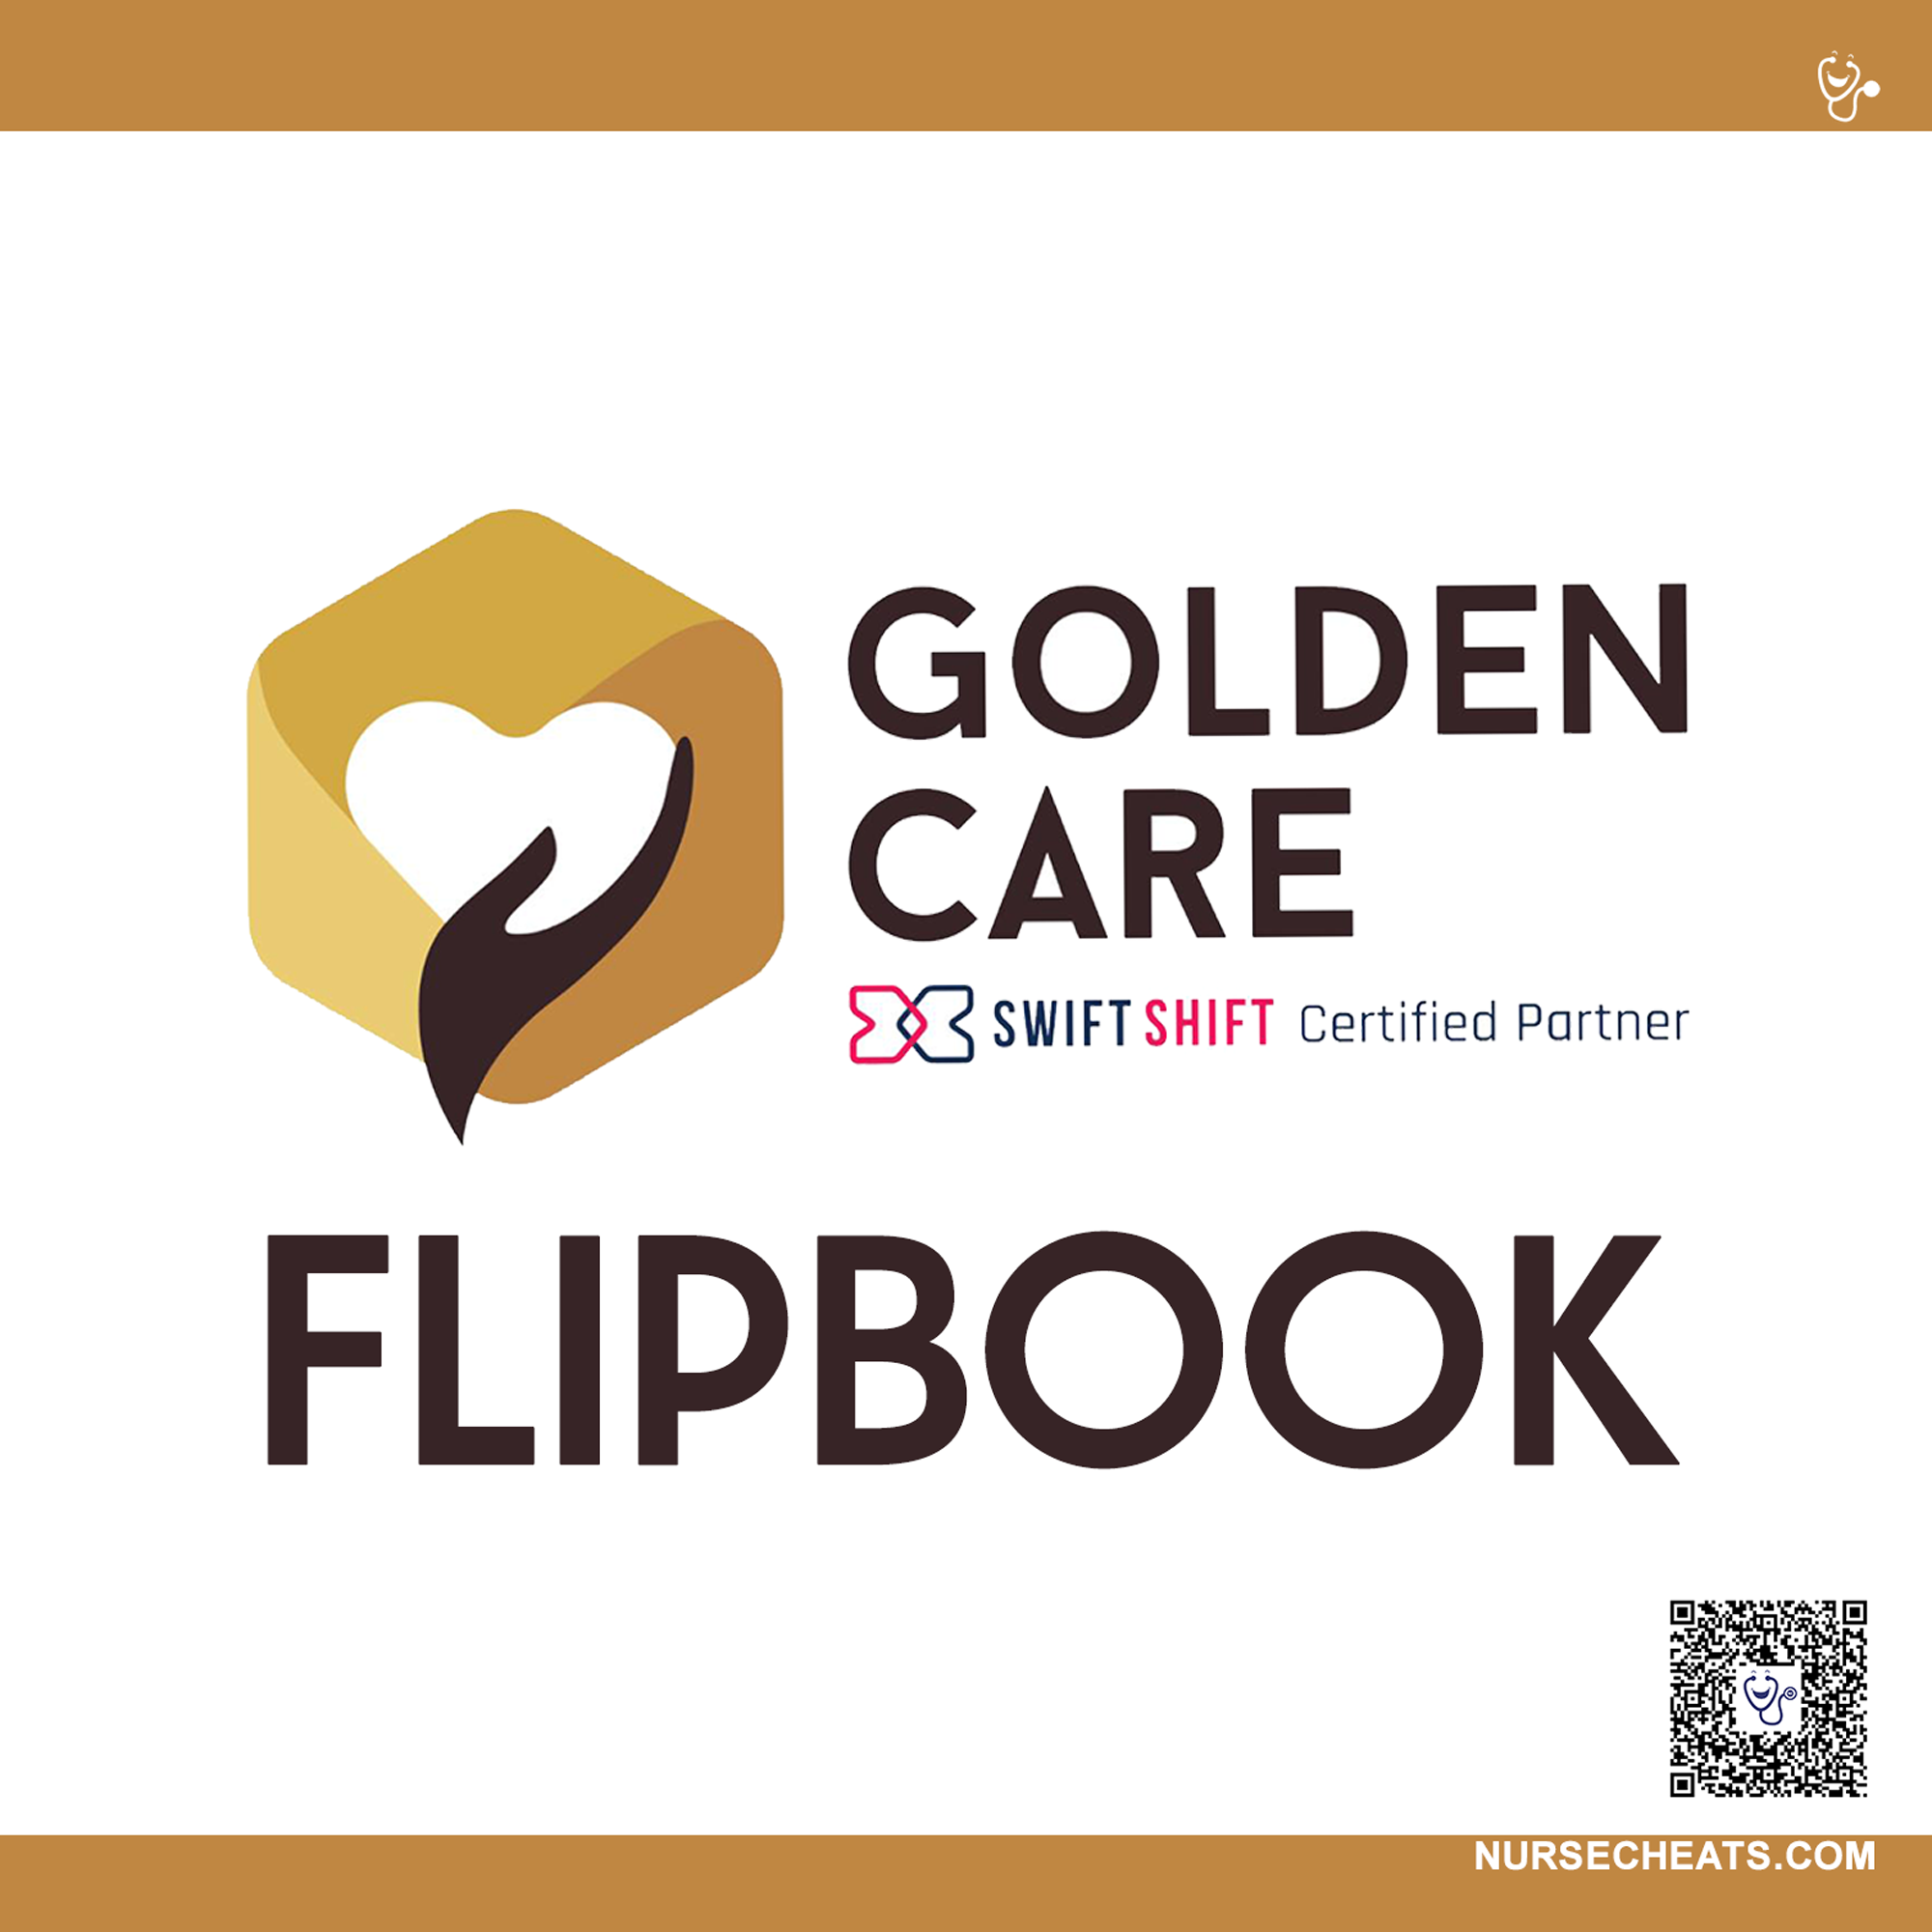 Our customized Pediatric FlipBook for Golden Care in PA.